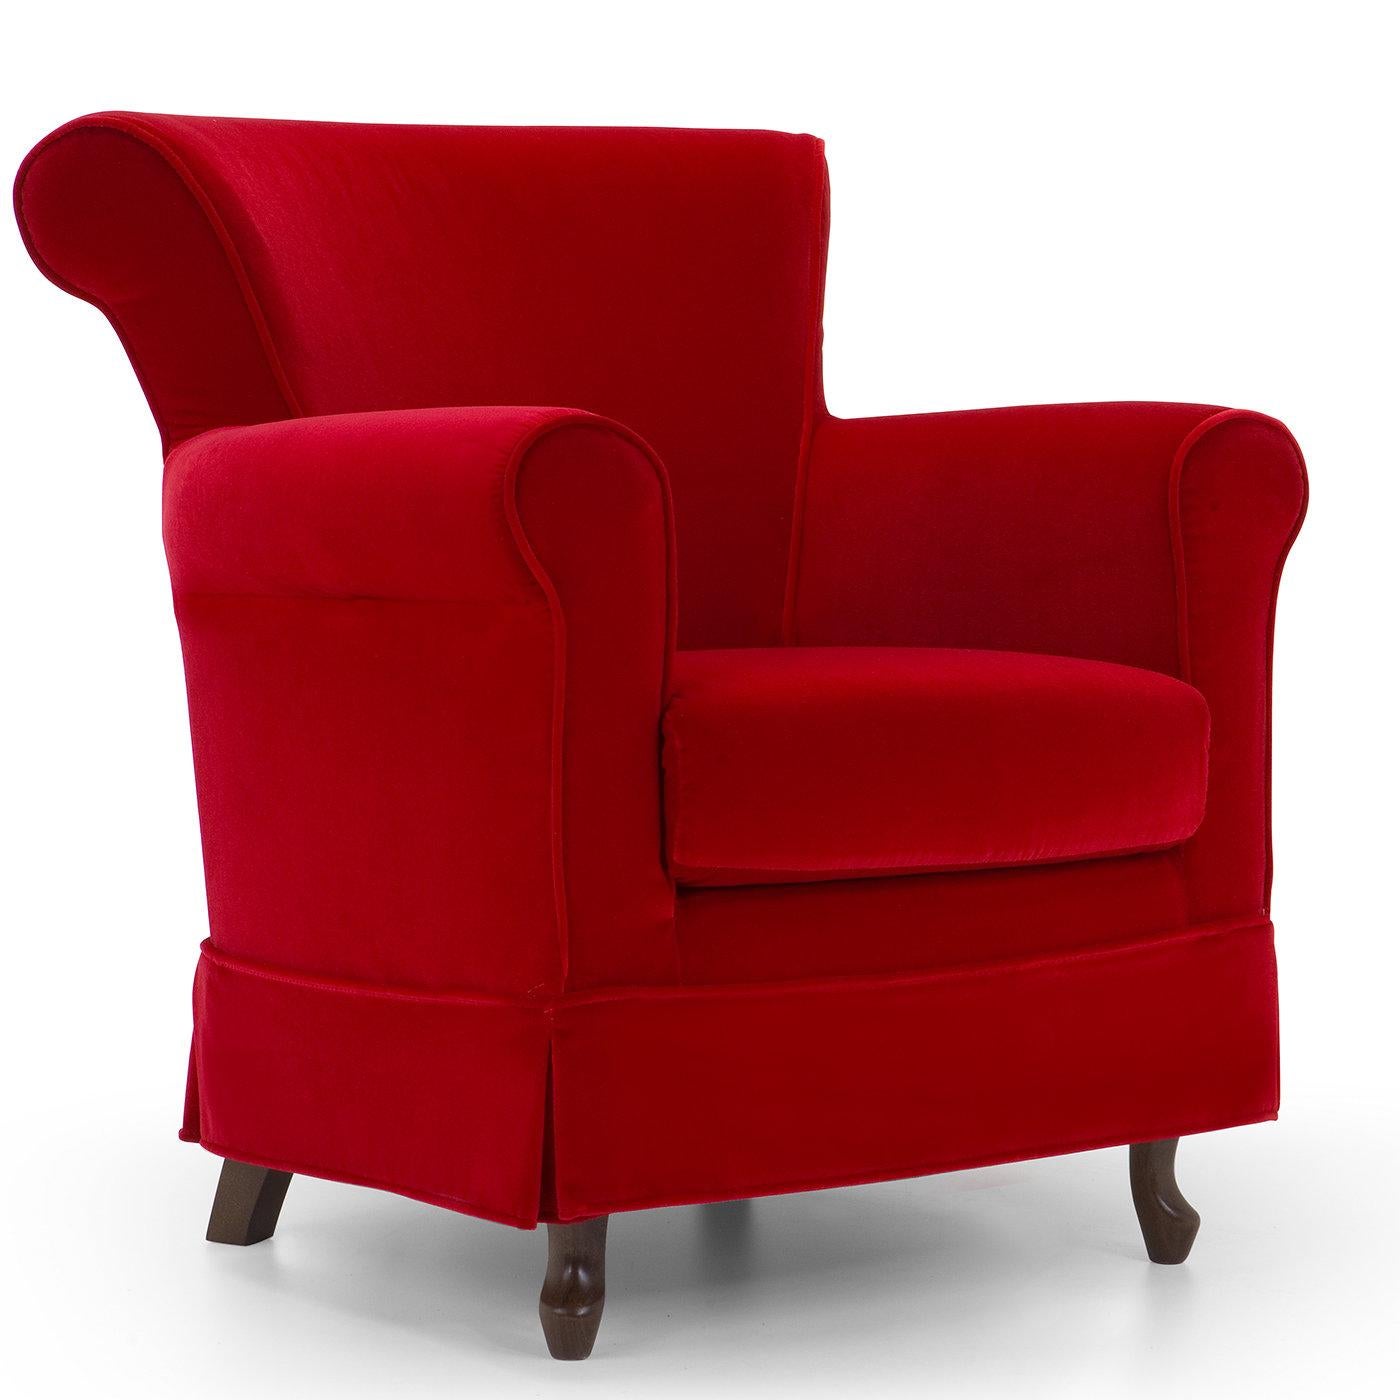 A sophisticated mix of traditional elegance and modern details, this armchair's imposing frame is entirely covered with a vivid red Dacron fabric. The injected flame-retardant polyurethane foam padding outlines the rolled backrest and armrests,